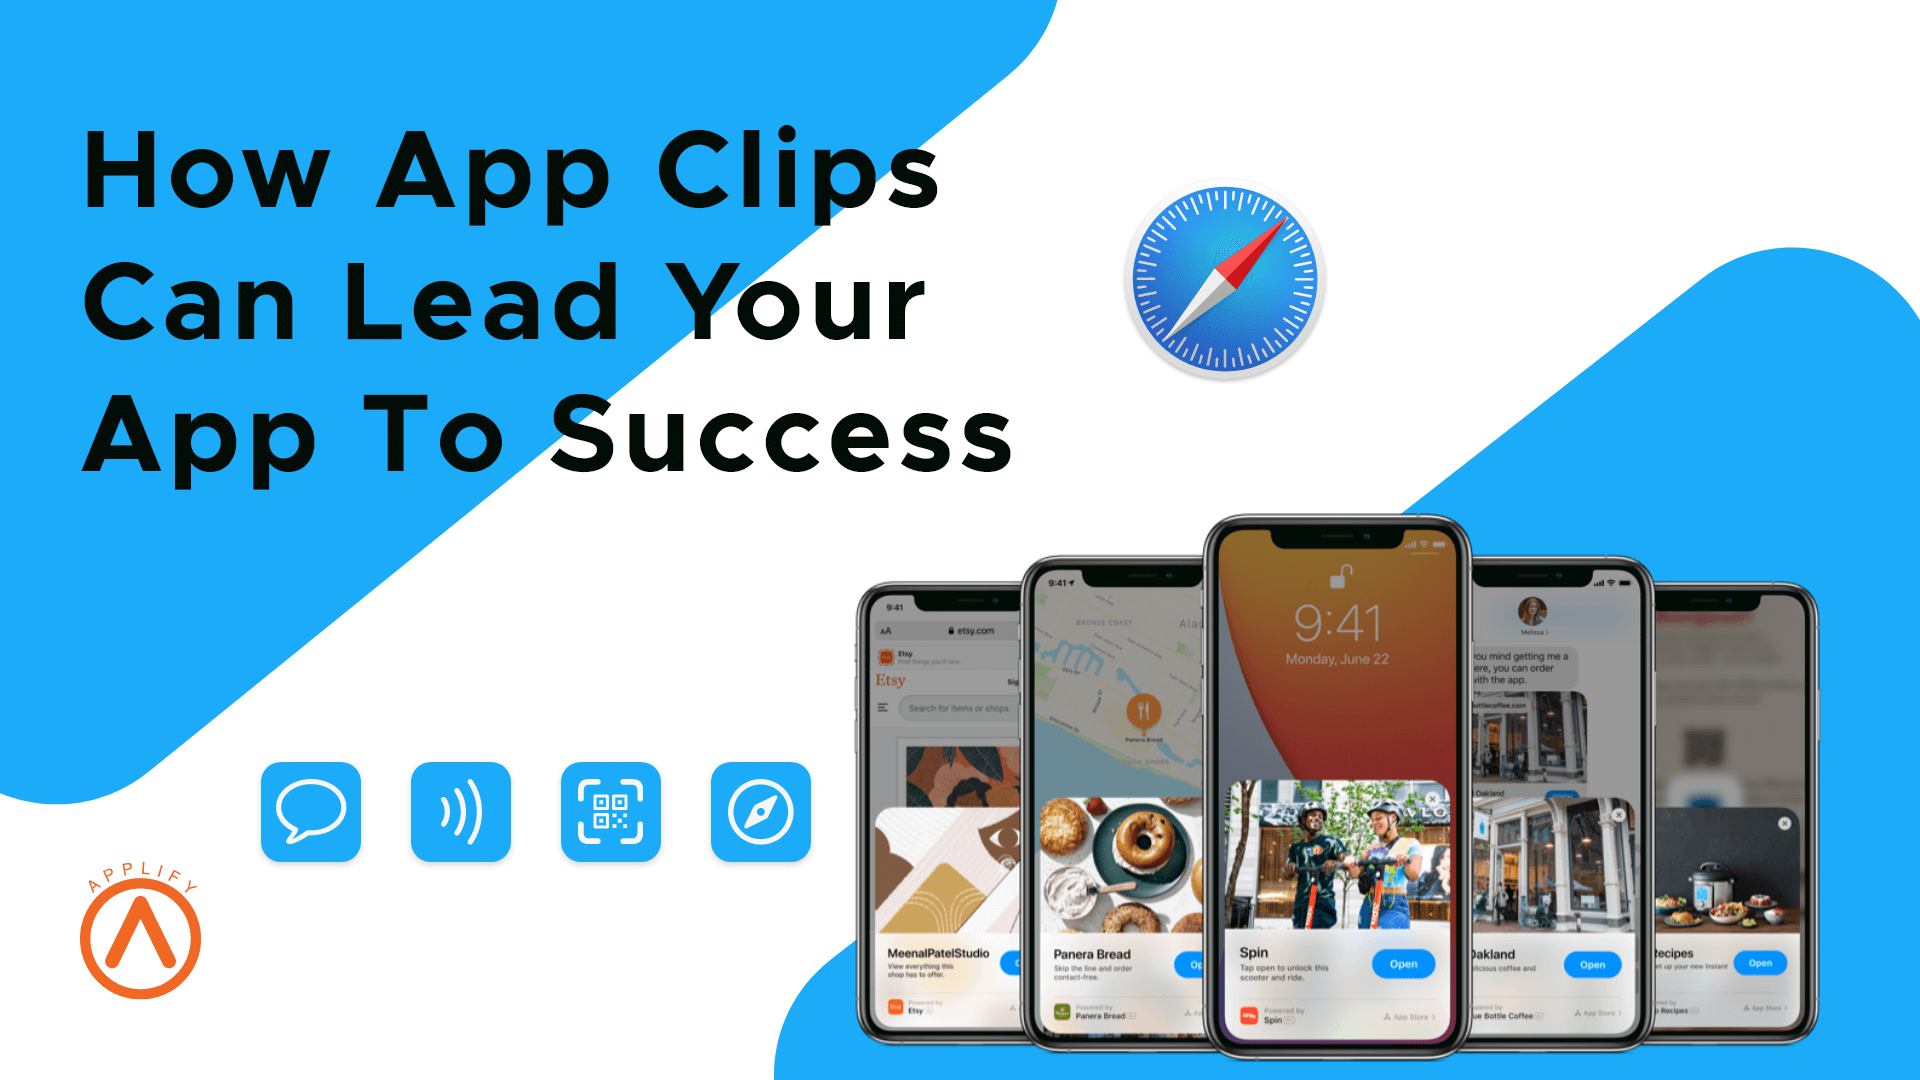 How App Clips Can Lead Your App to Success